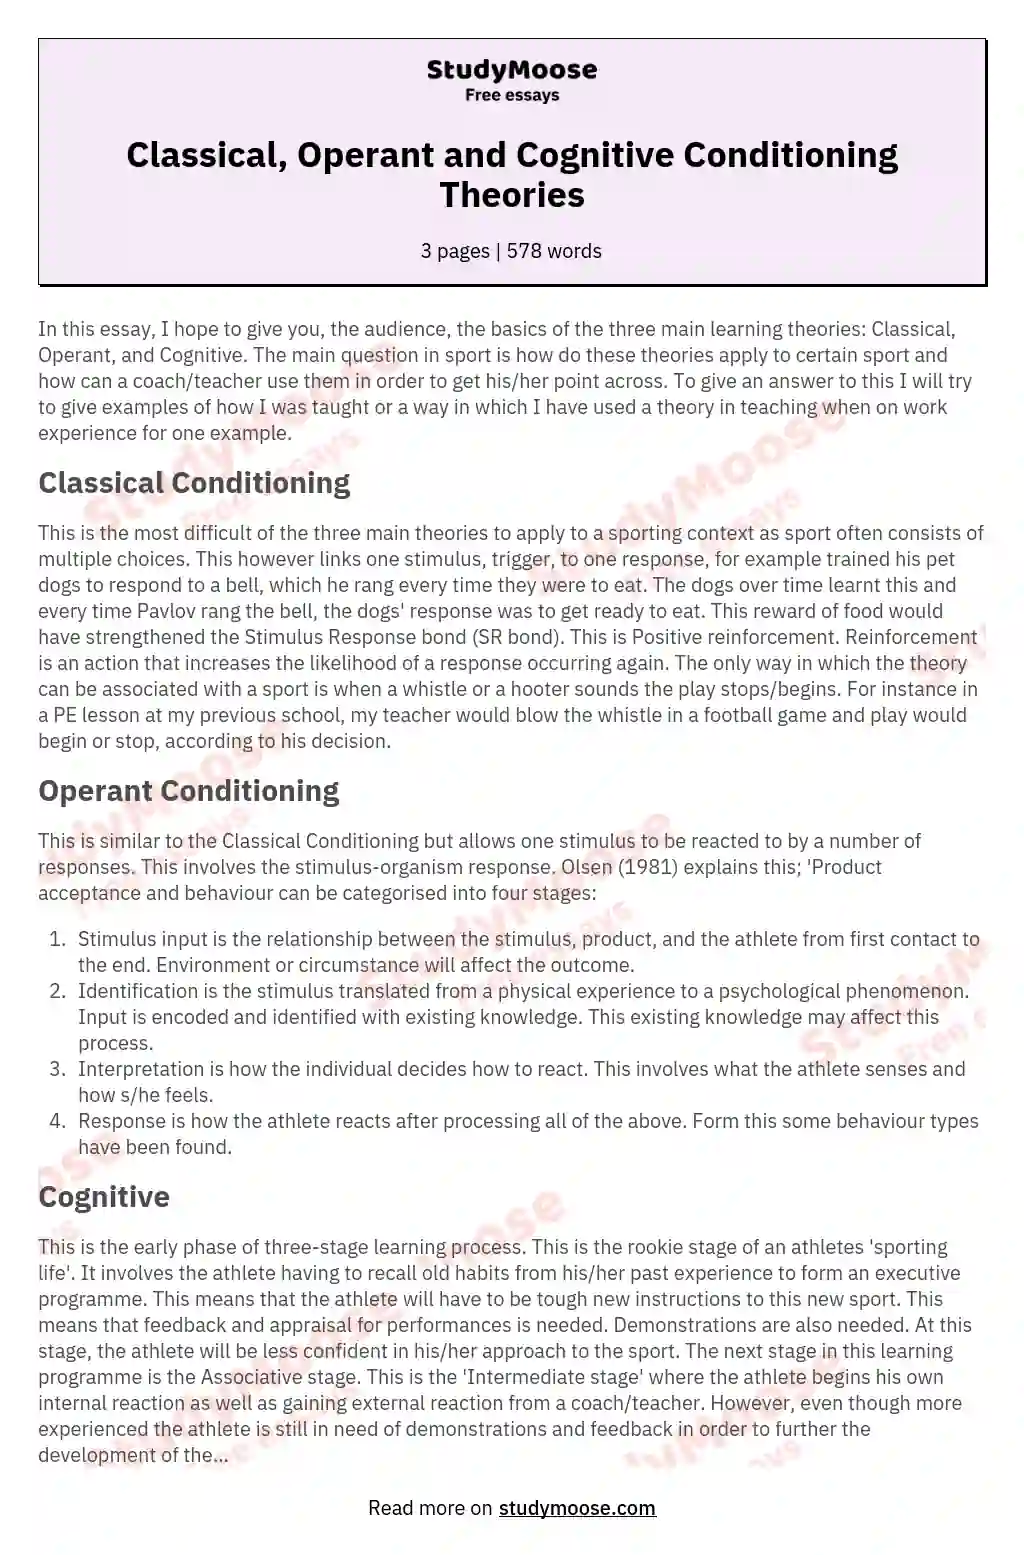 Classical, Operant and Cognitive Conditioning Theories essay